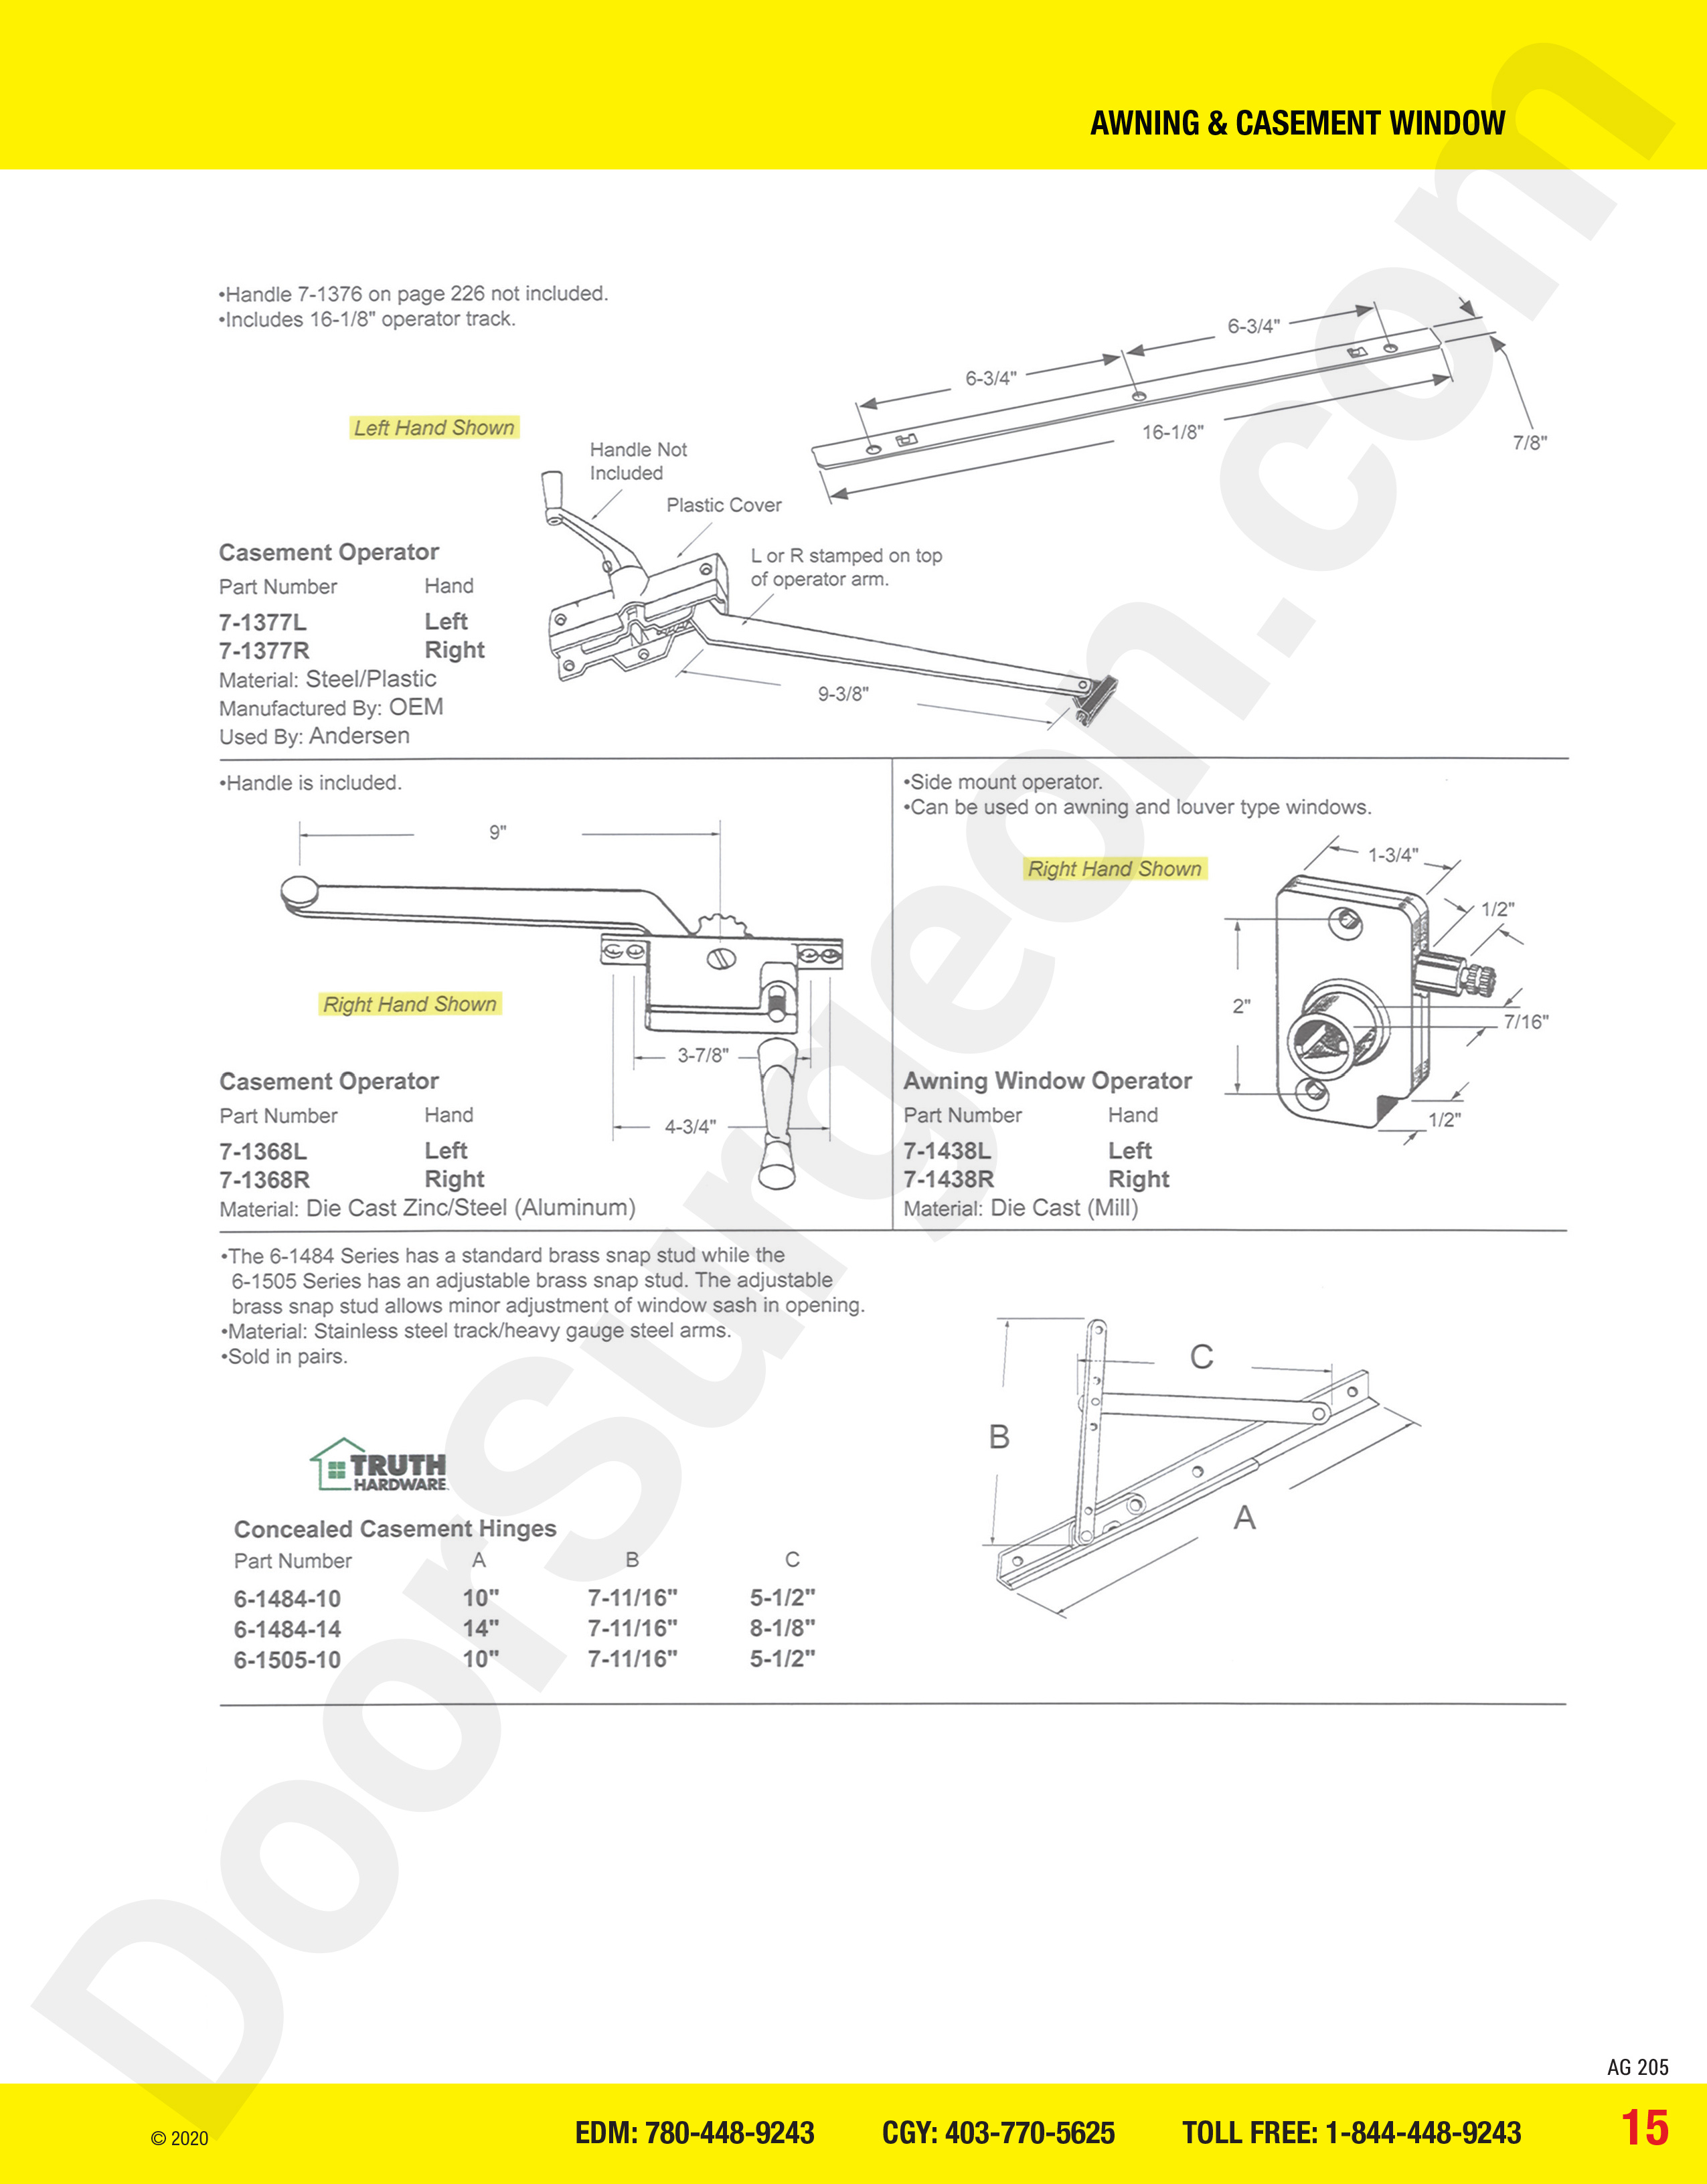 awning and casement window parts for operators